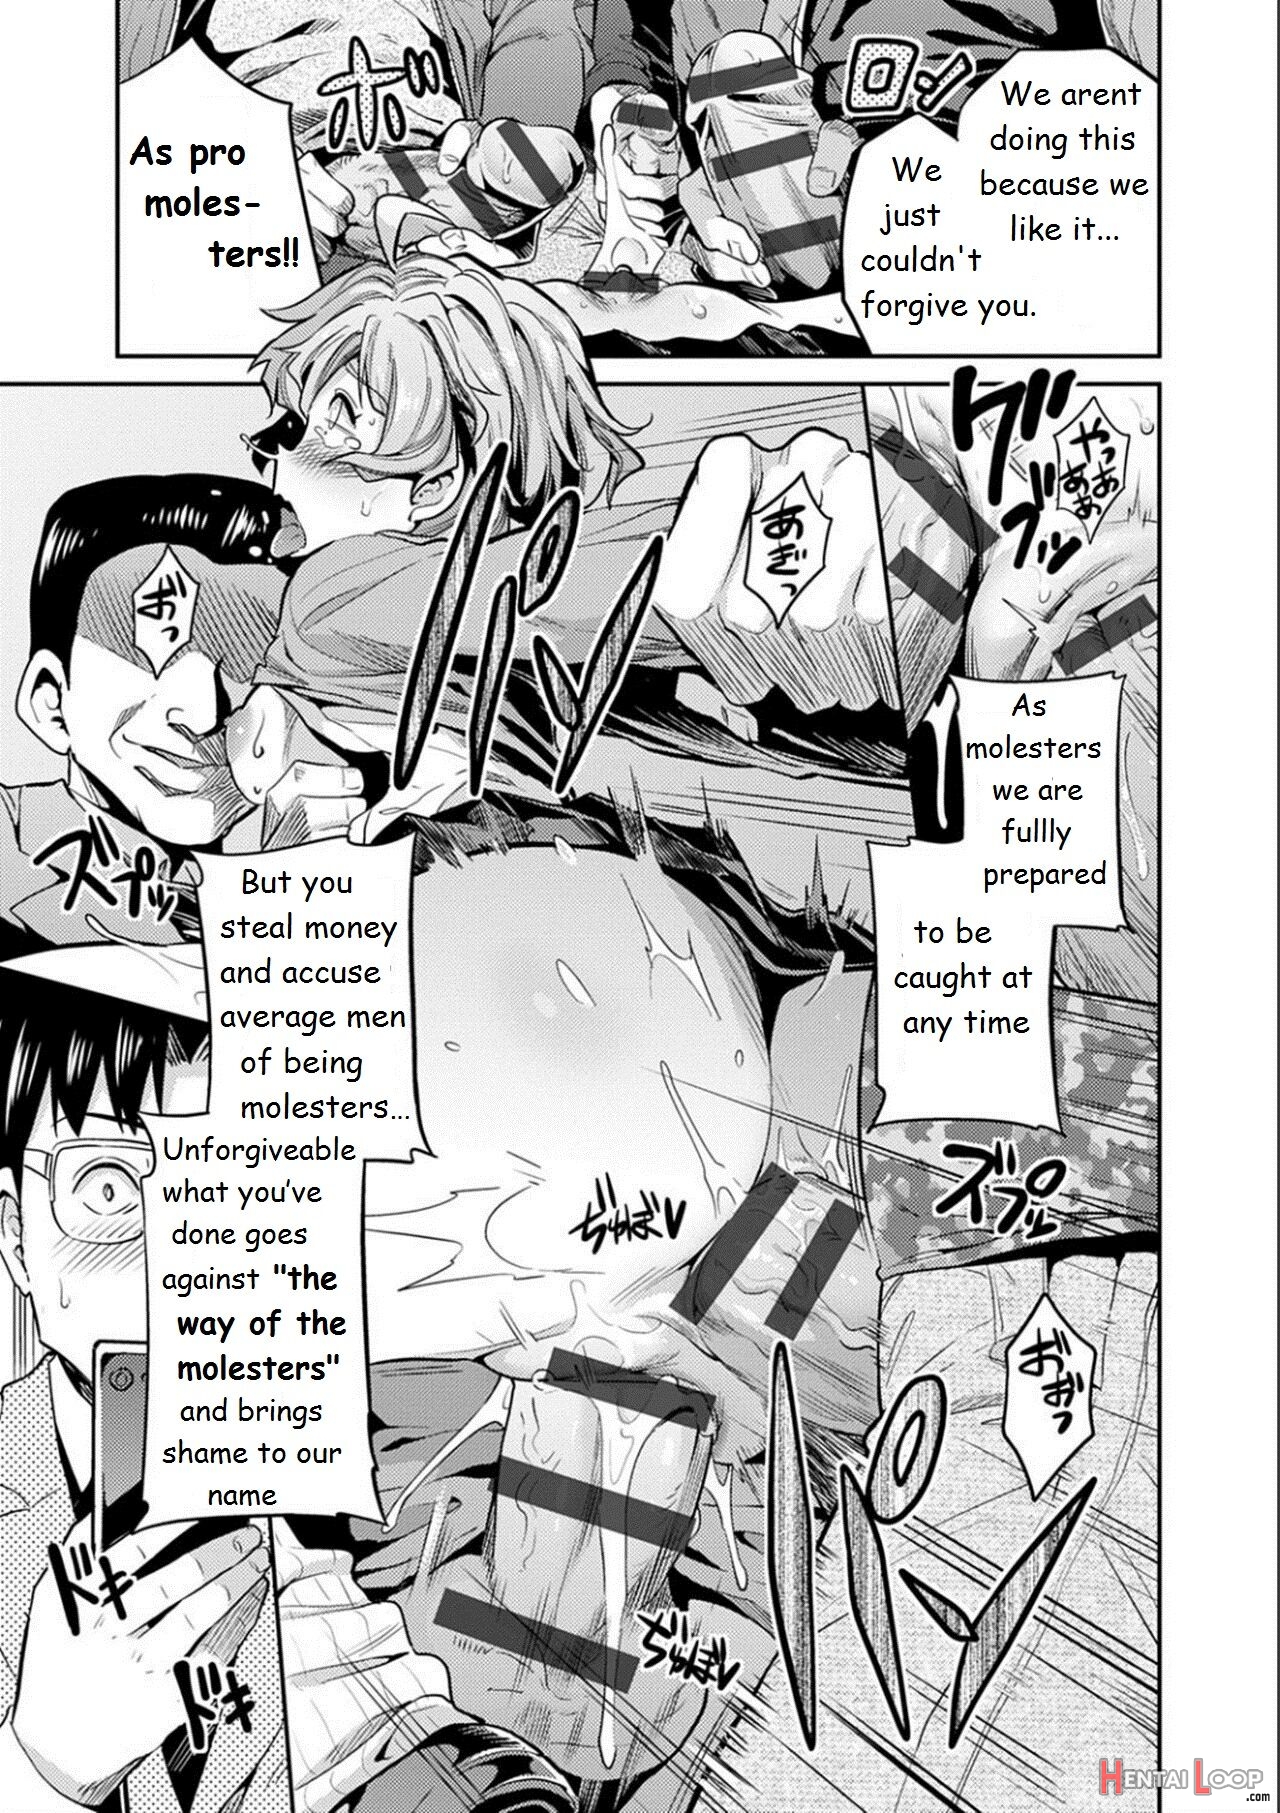 The Girl Who Cried Molester Kyousei Tanetsuke Express - Forced Seeding Express 1st Story page 20